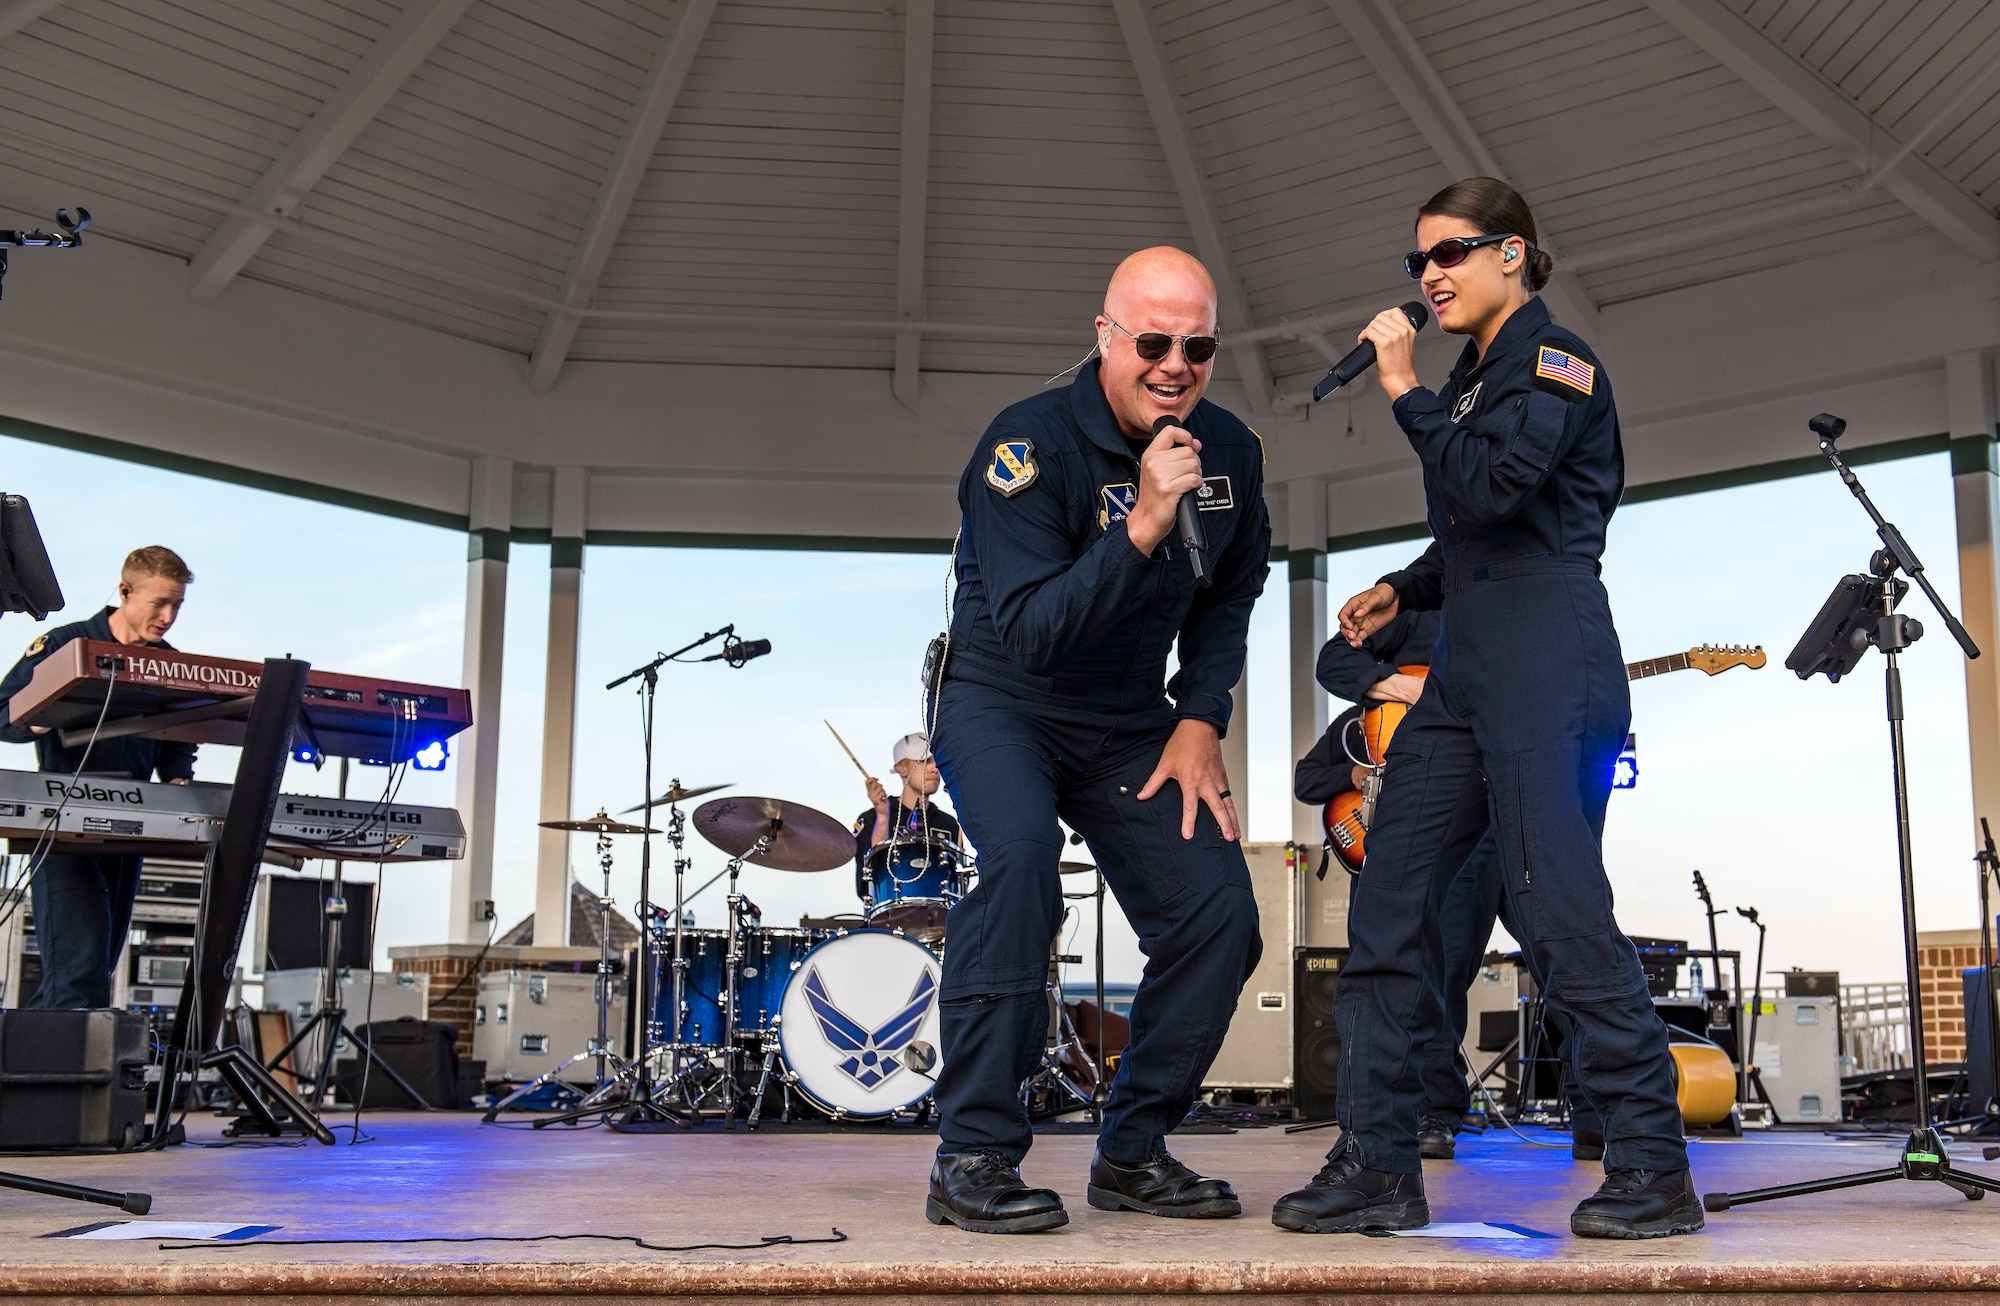 Senior Master Sgt. Ryan Carson, Max Impact superintendent and vocalist, and Tech. Sgt. Nalani Quintello, Max Impact vocalist, perform a song together June 16, 2018, on the bandstand at Rehoboth Beach, Del. Max Impact, the premier rock band of the U.S. Air Force, is stationed at Joint Base Anacostia-Bolling in Washington, D.C. (U.S. Air Force photo by Roland Balik)